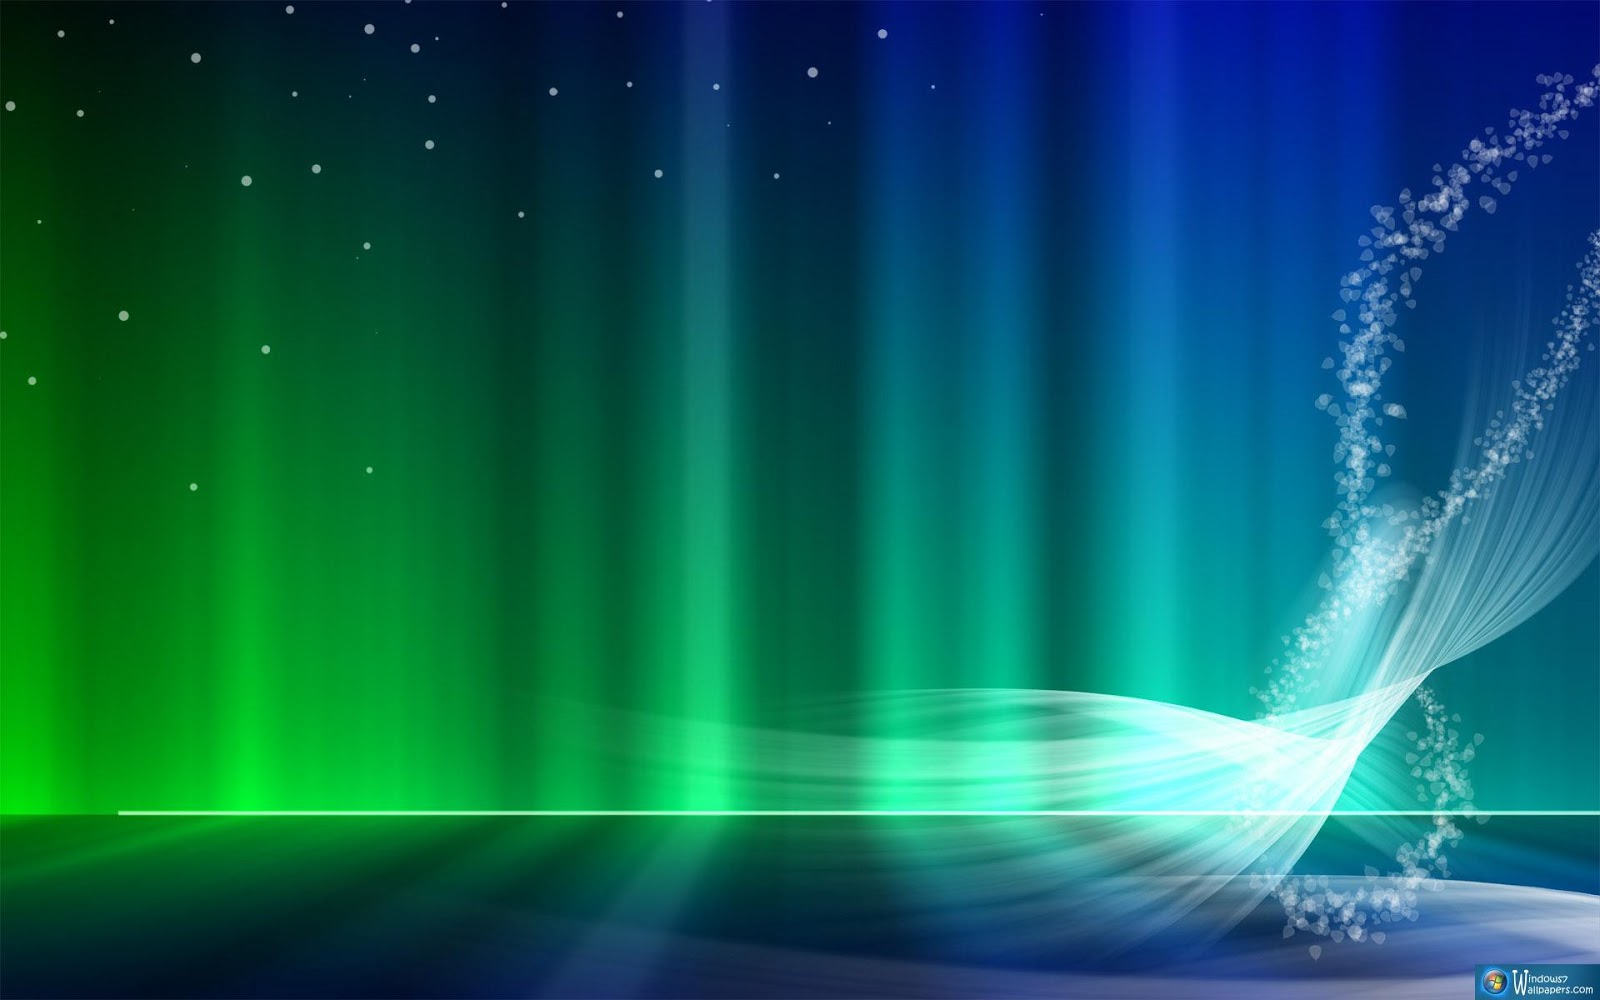 Windows 7 Backgrounds Wallpapers for